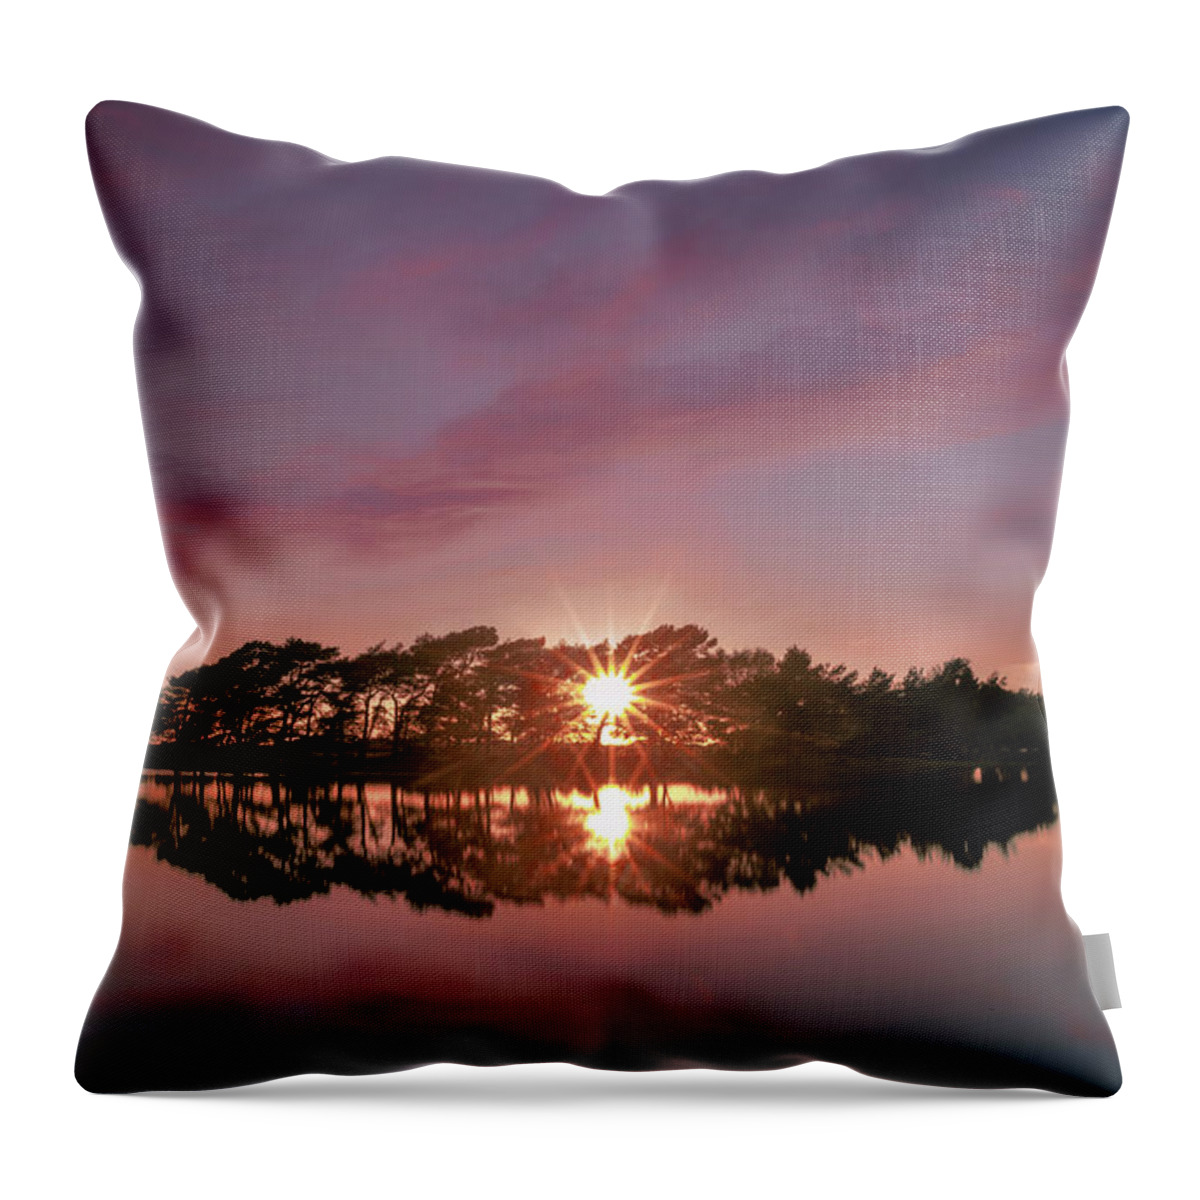 Hatchet Pond Throw Pillow featuring the photograph Hatchet Pond - New Forest, England #2 by Joana Kruse